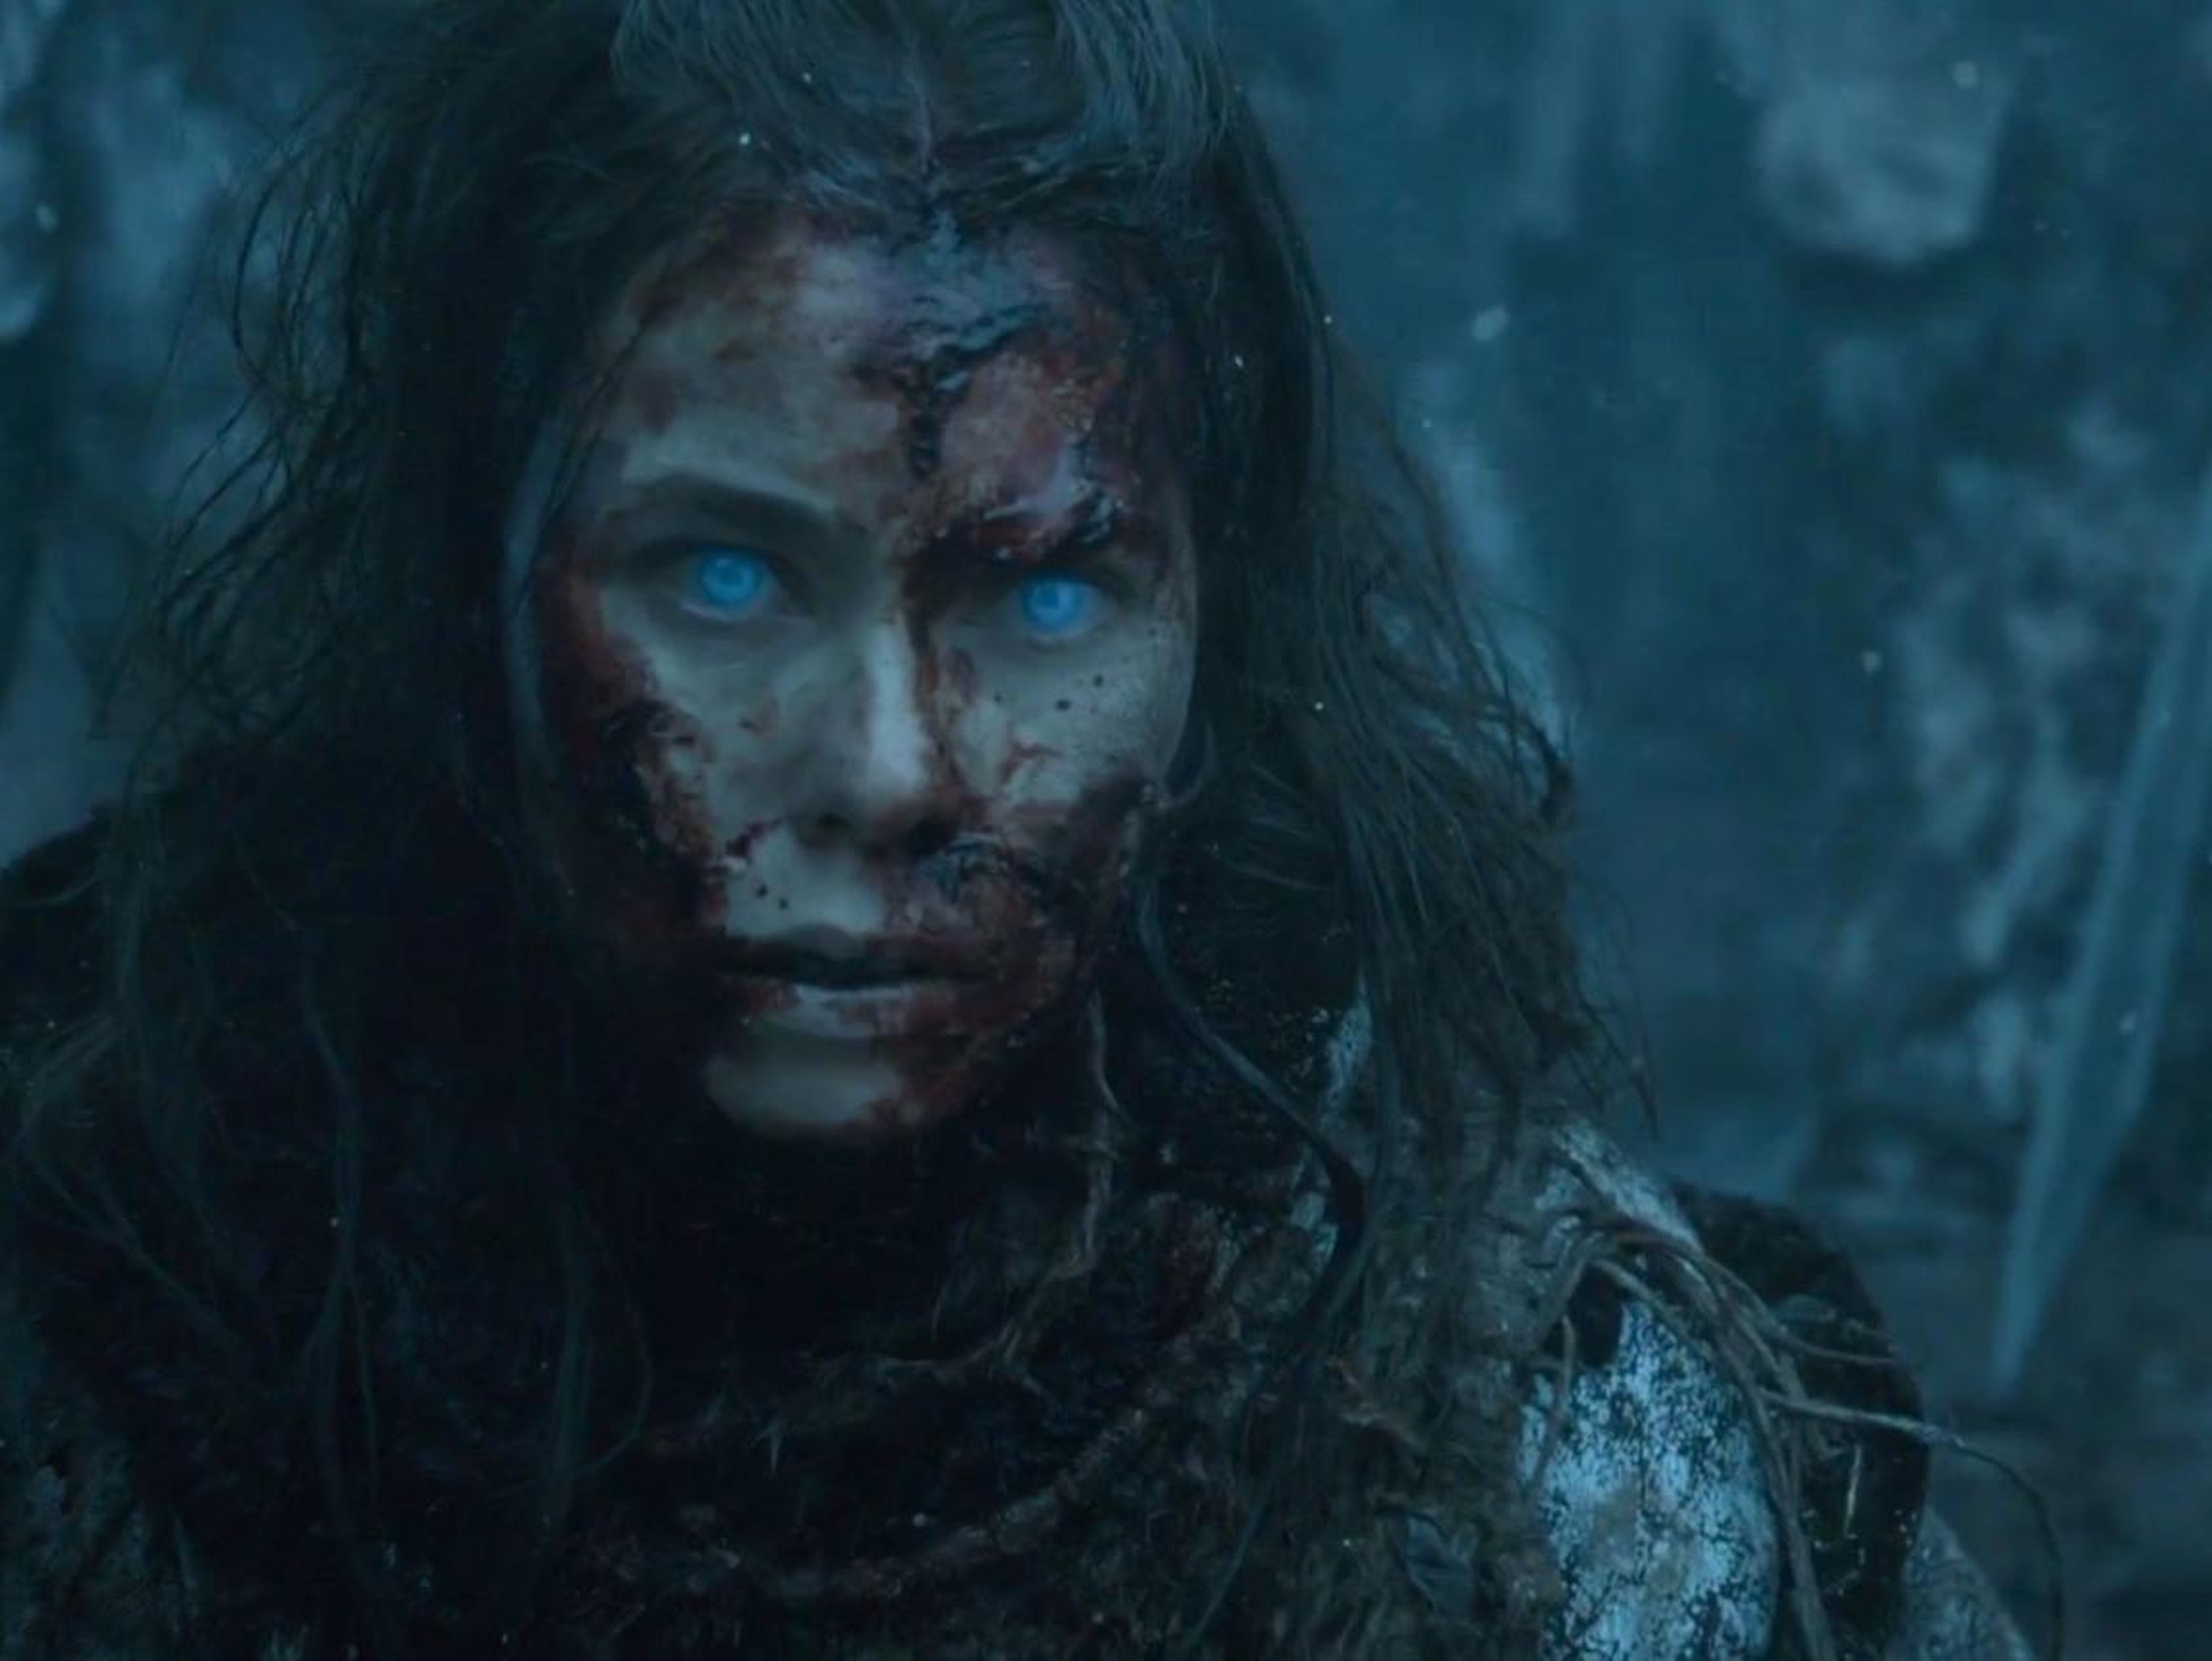 In "Game of Thrones," the Night King can use magic to reanimate dead bodies.